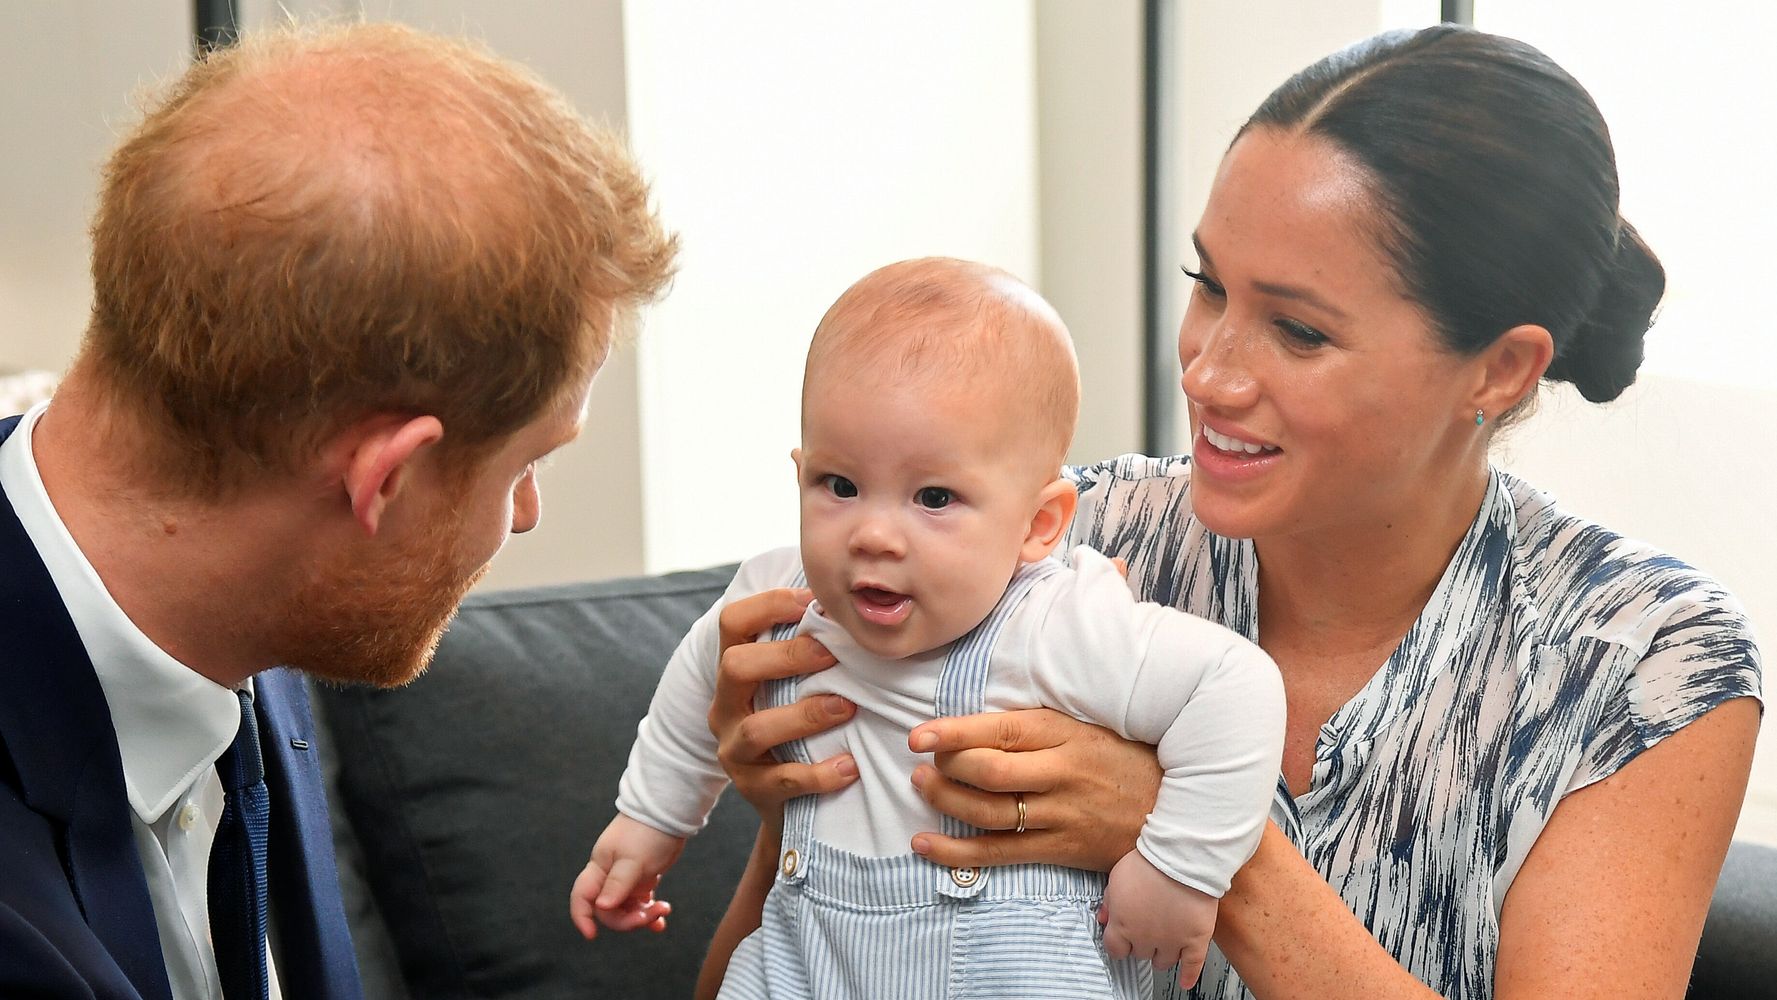 Meghan Markle Describes Having Miscarriage While Holding Baby Archie